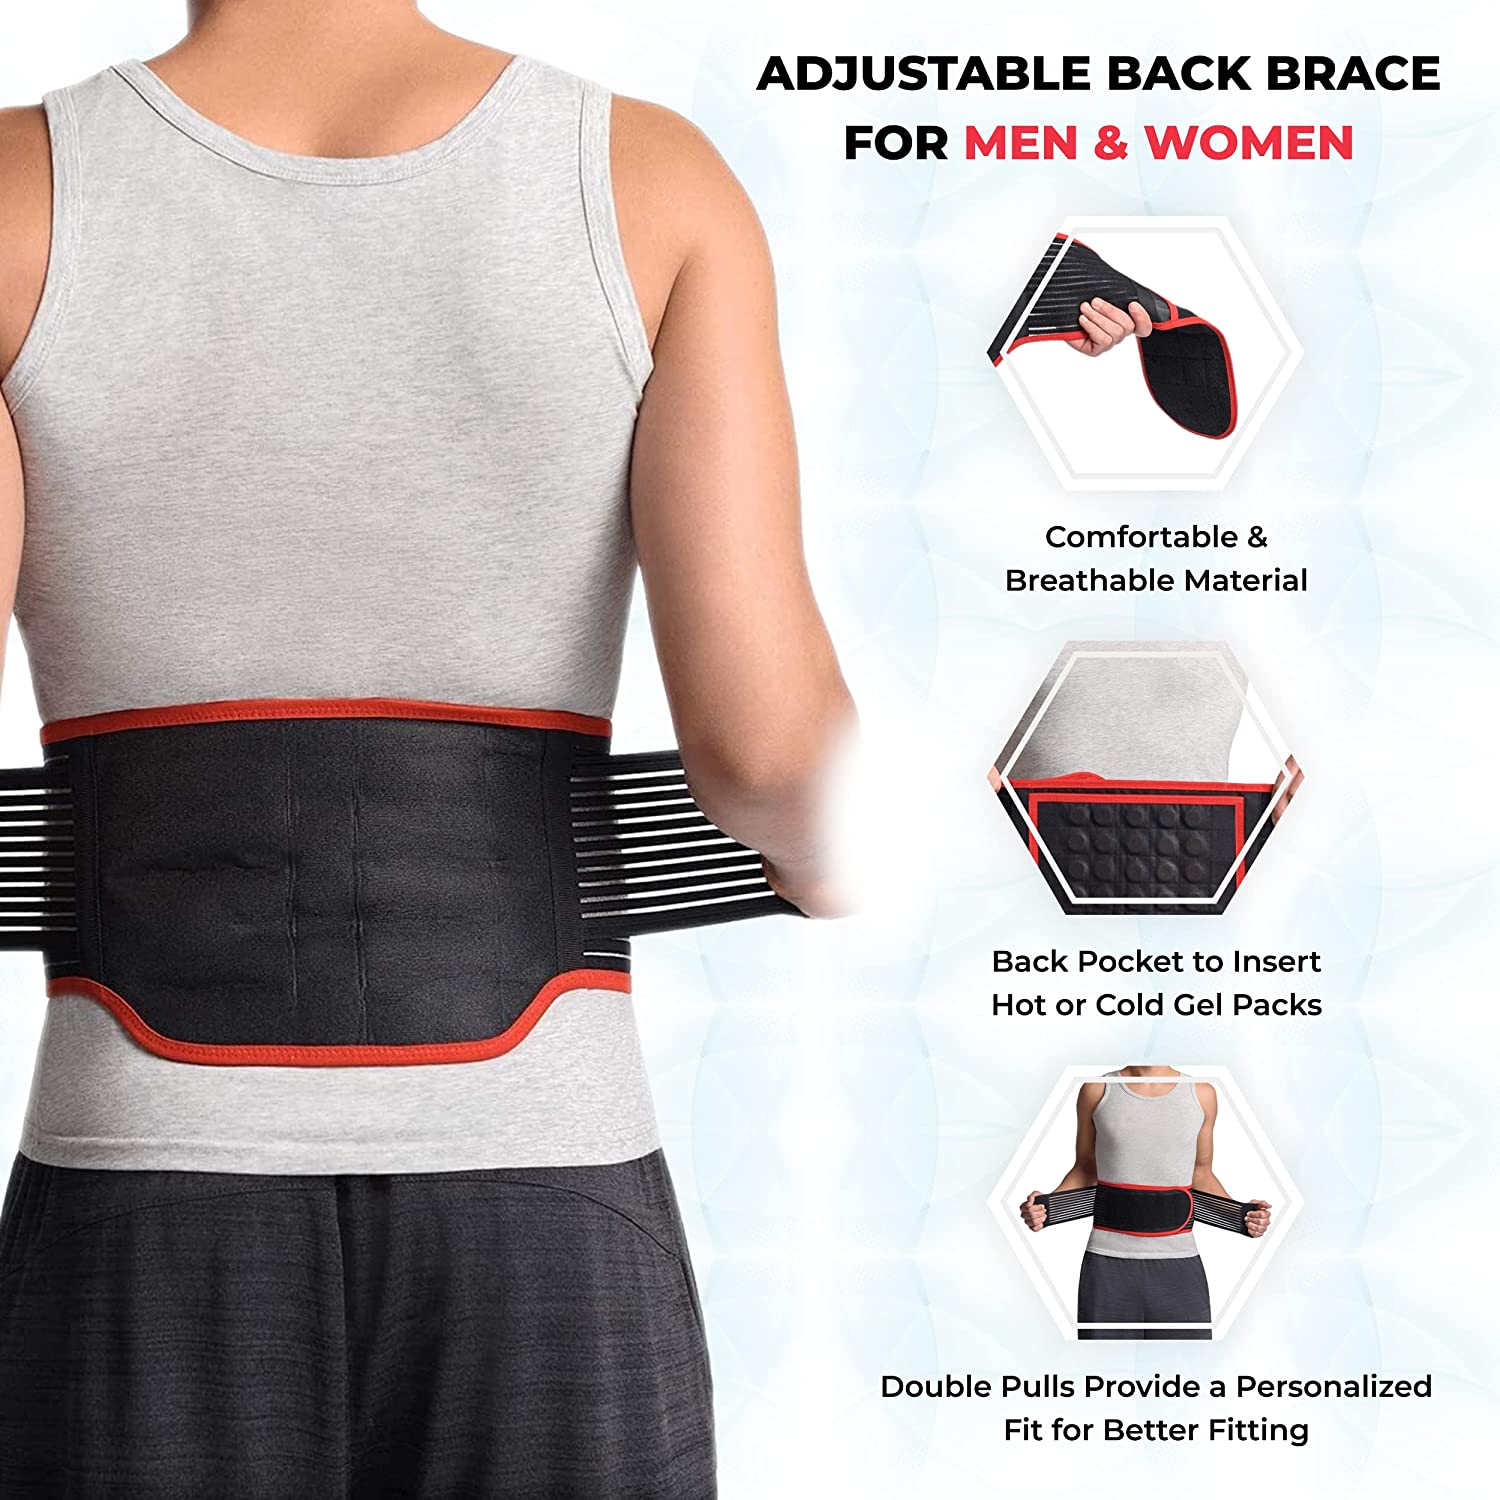 Magnetic Back Support Belt Breathable Lower Back Brace Pain Relief